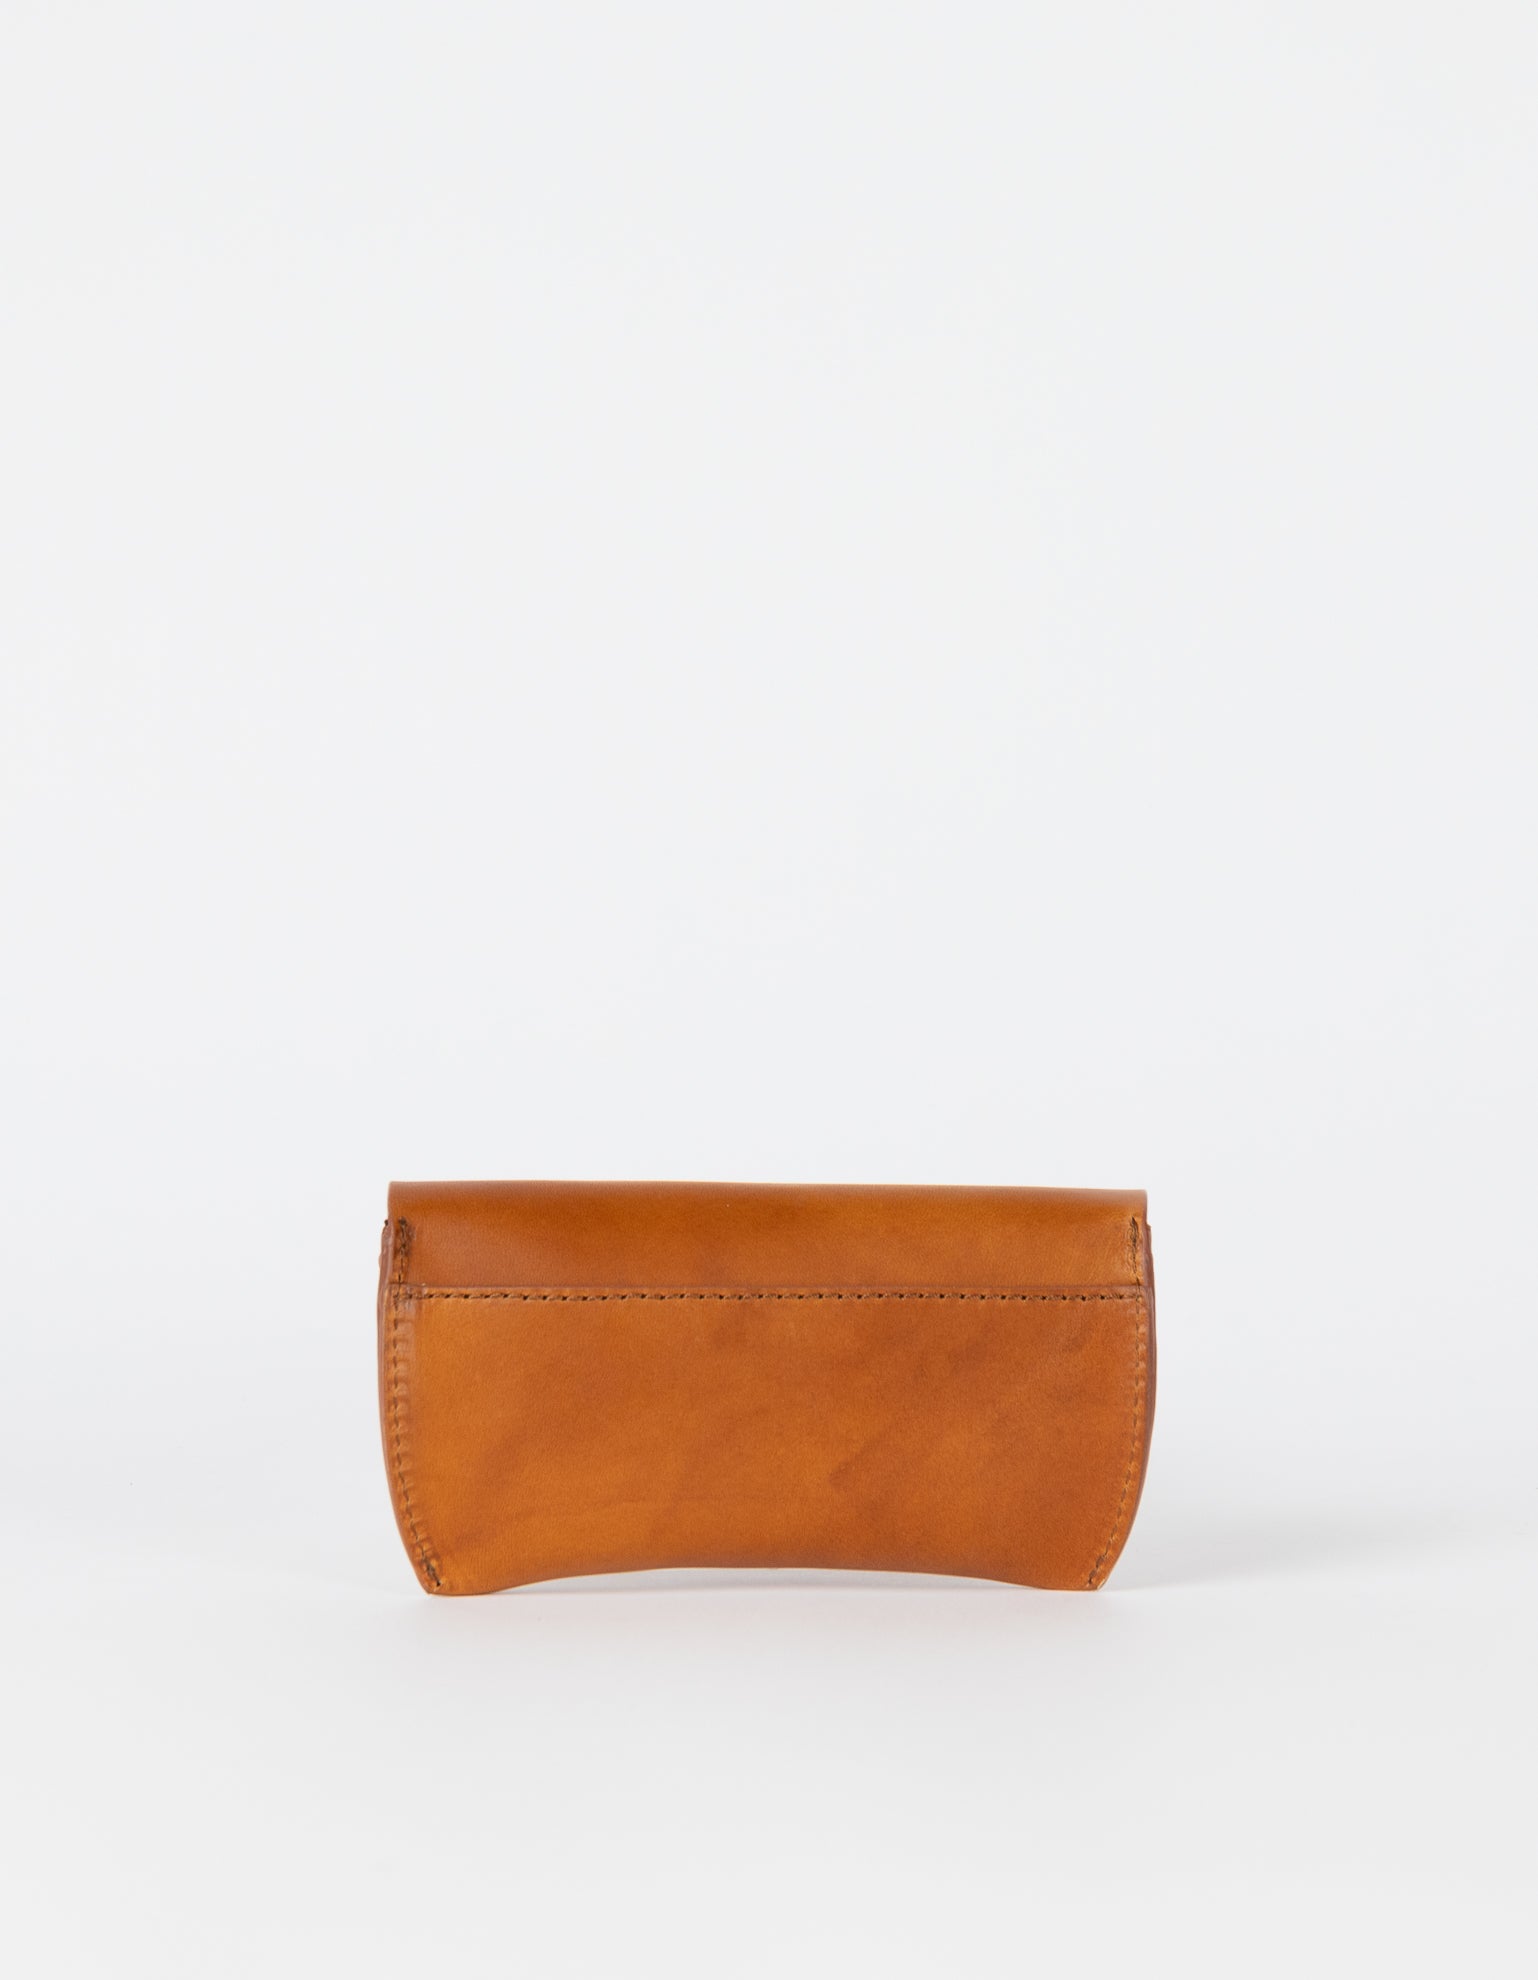 Spectacle Case Cognac Classic Leather - back image